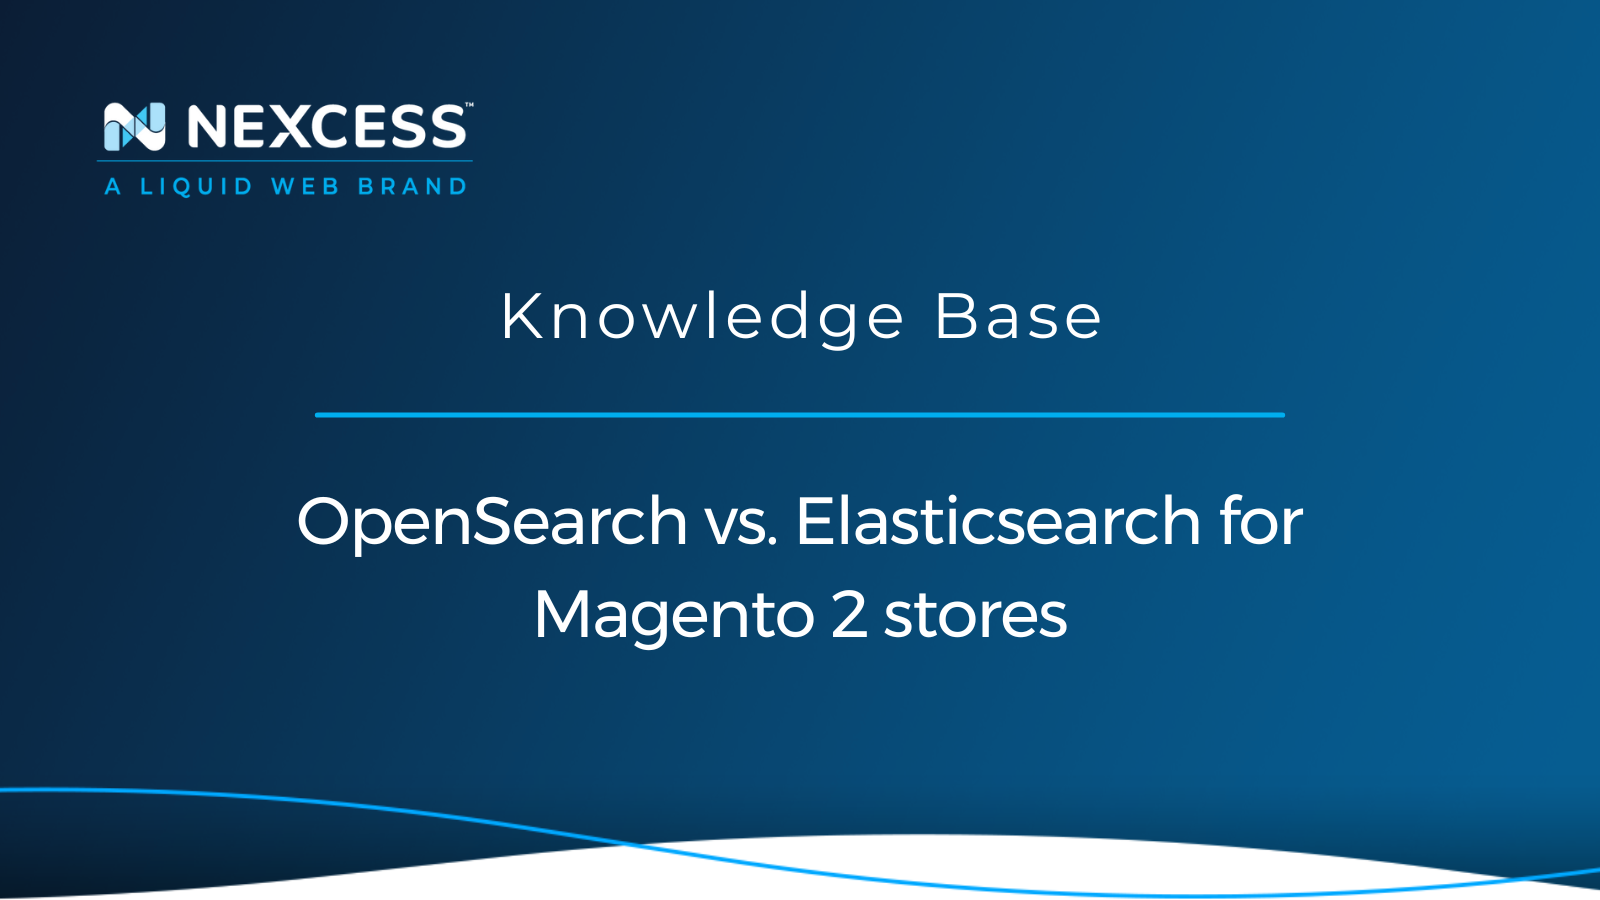 OpenSearch vs. Elasticsearch for Magento 2 stores